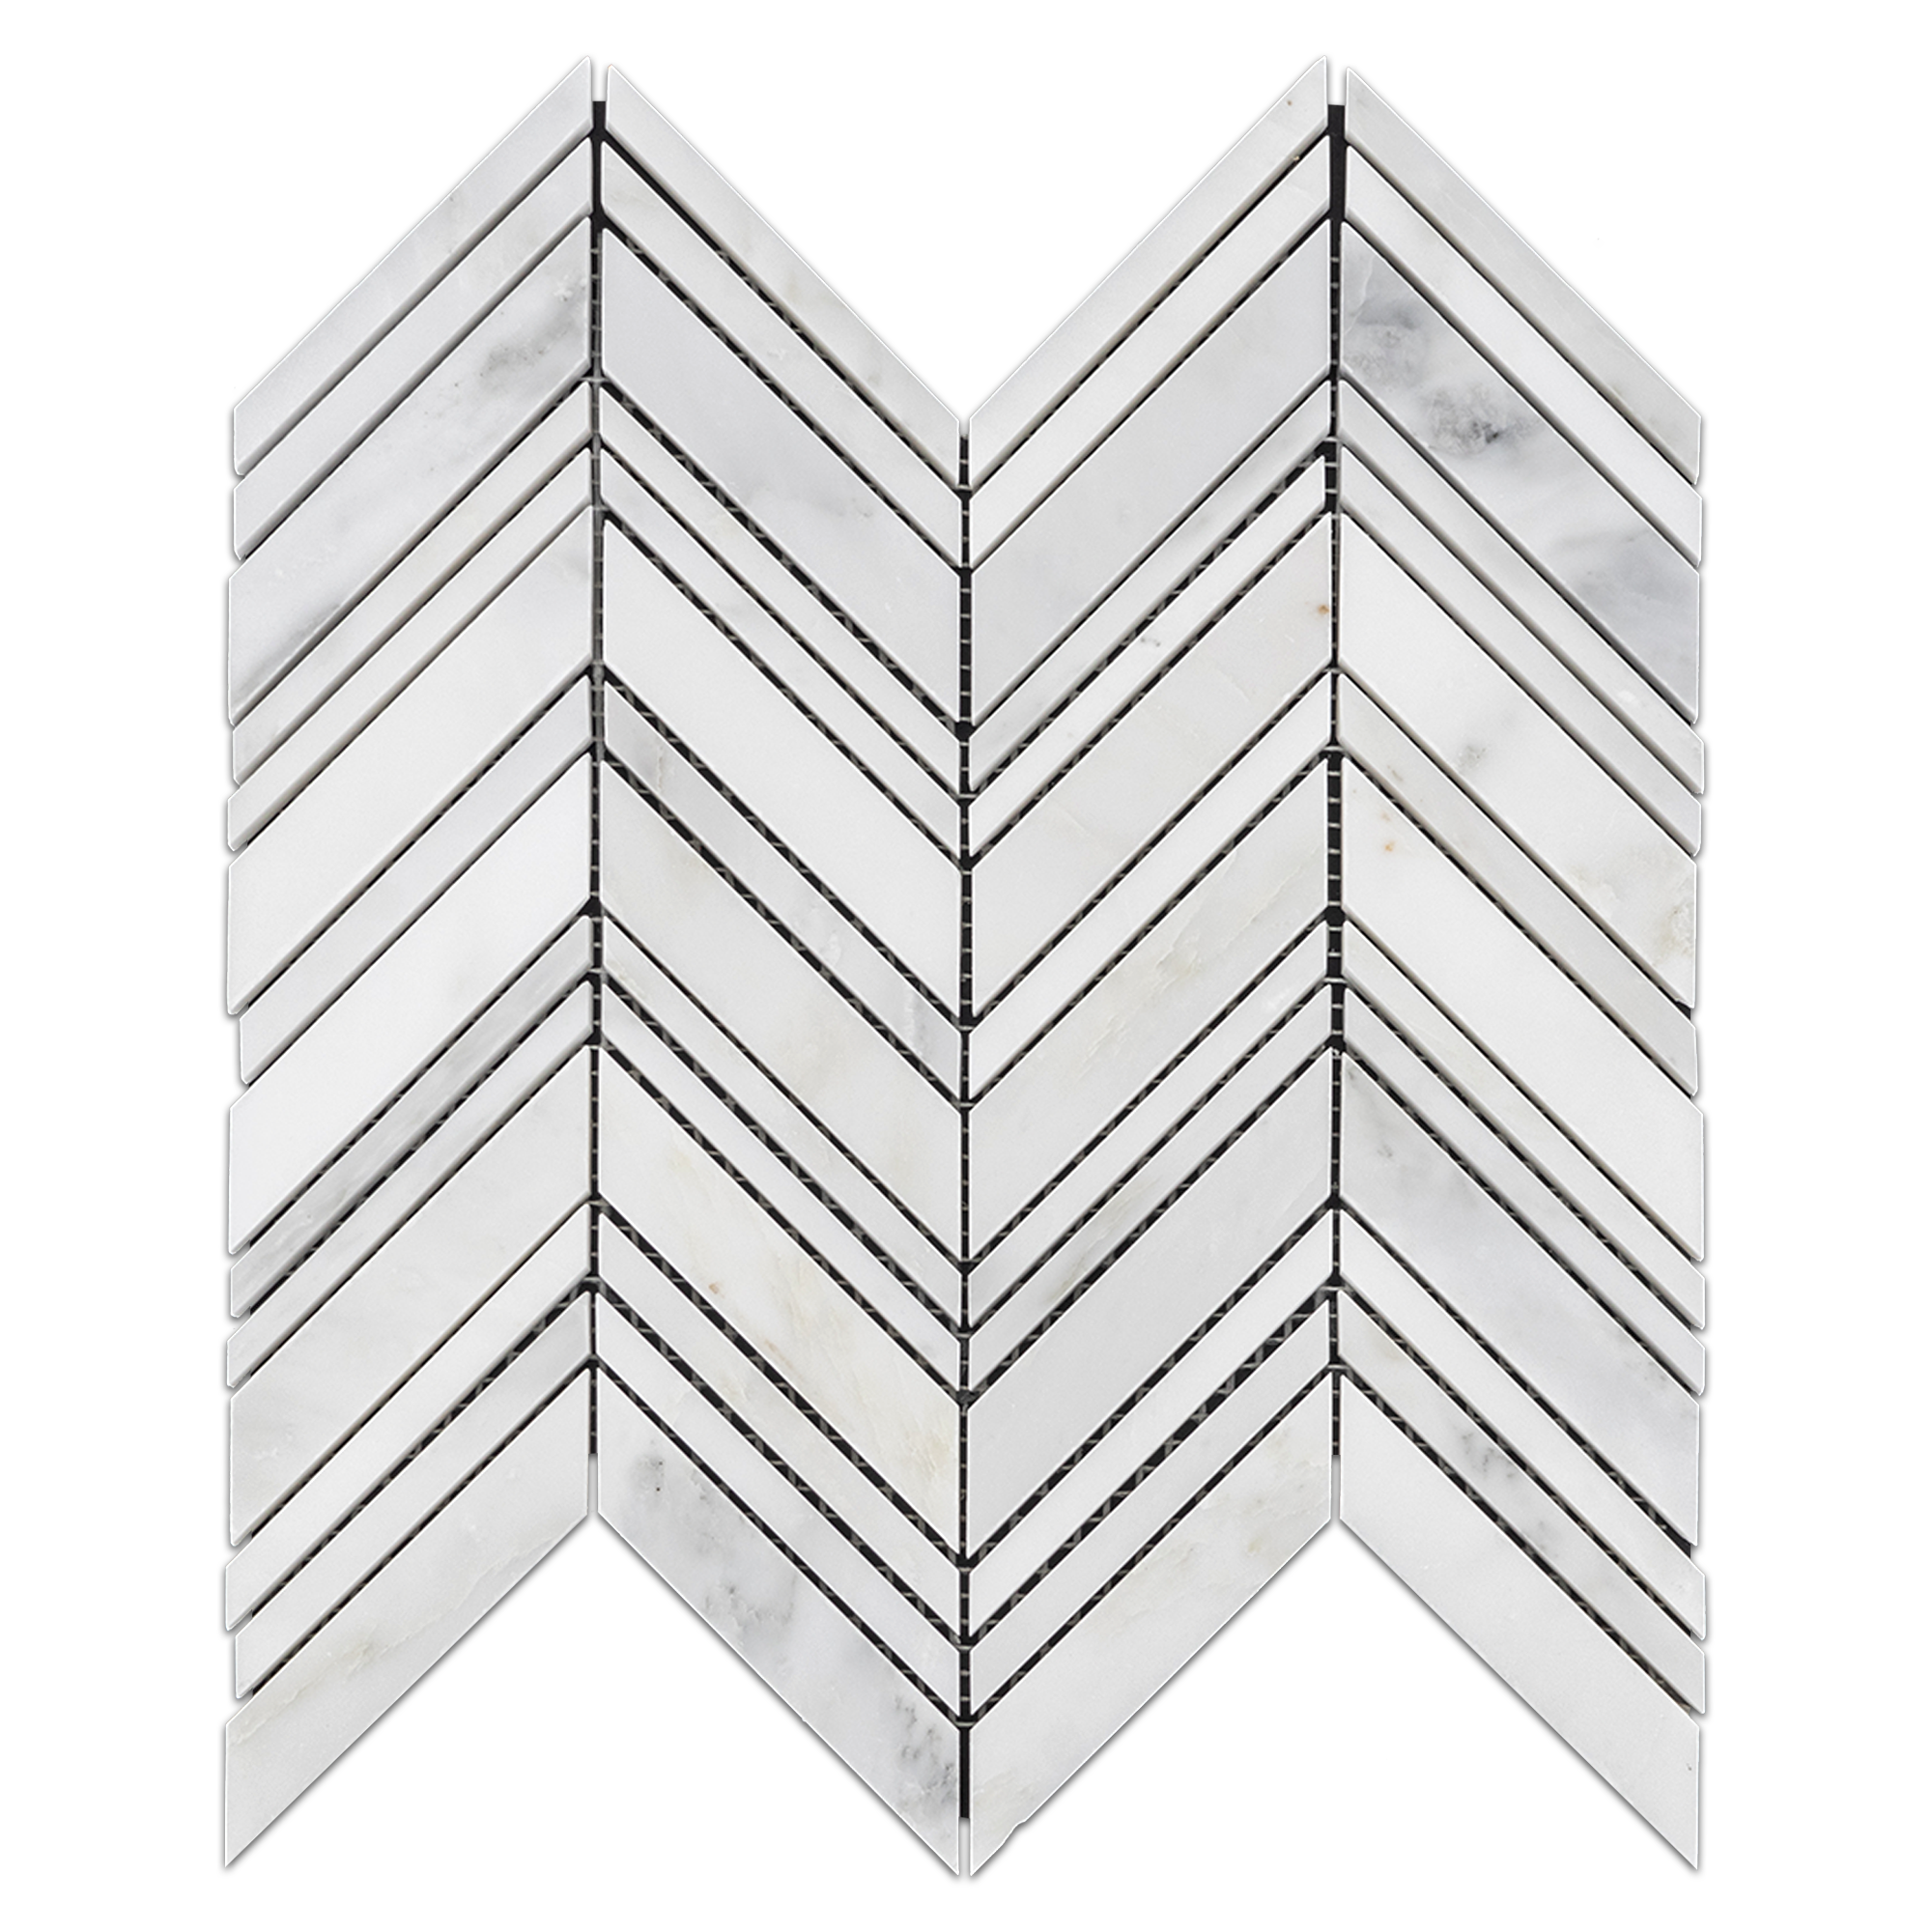 Elon Pearl White Marble Bordered Chevron Field Mosaic 11x11_375x0_375 Honed AM1166H Surface Group International Product